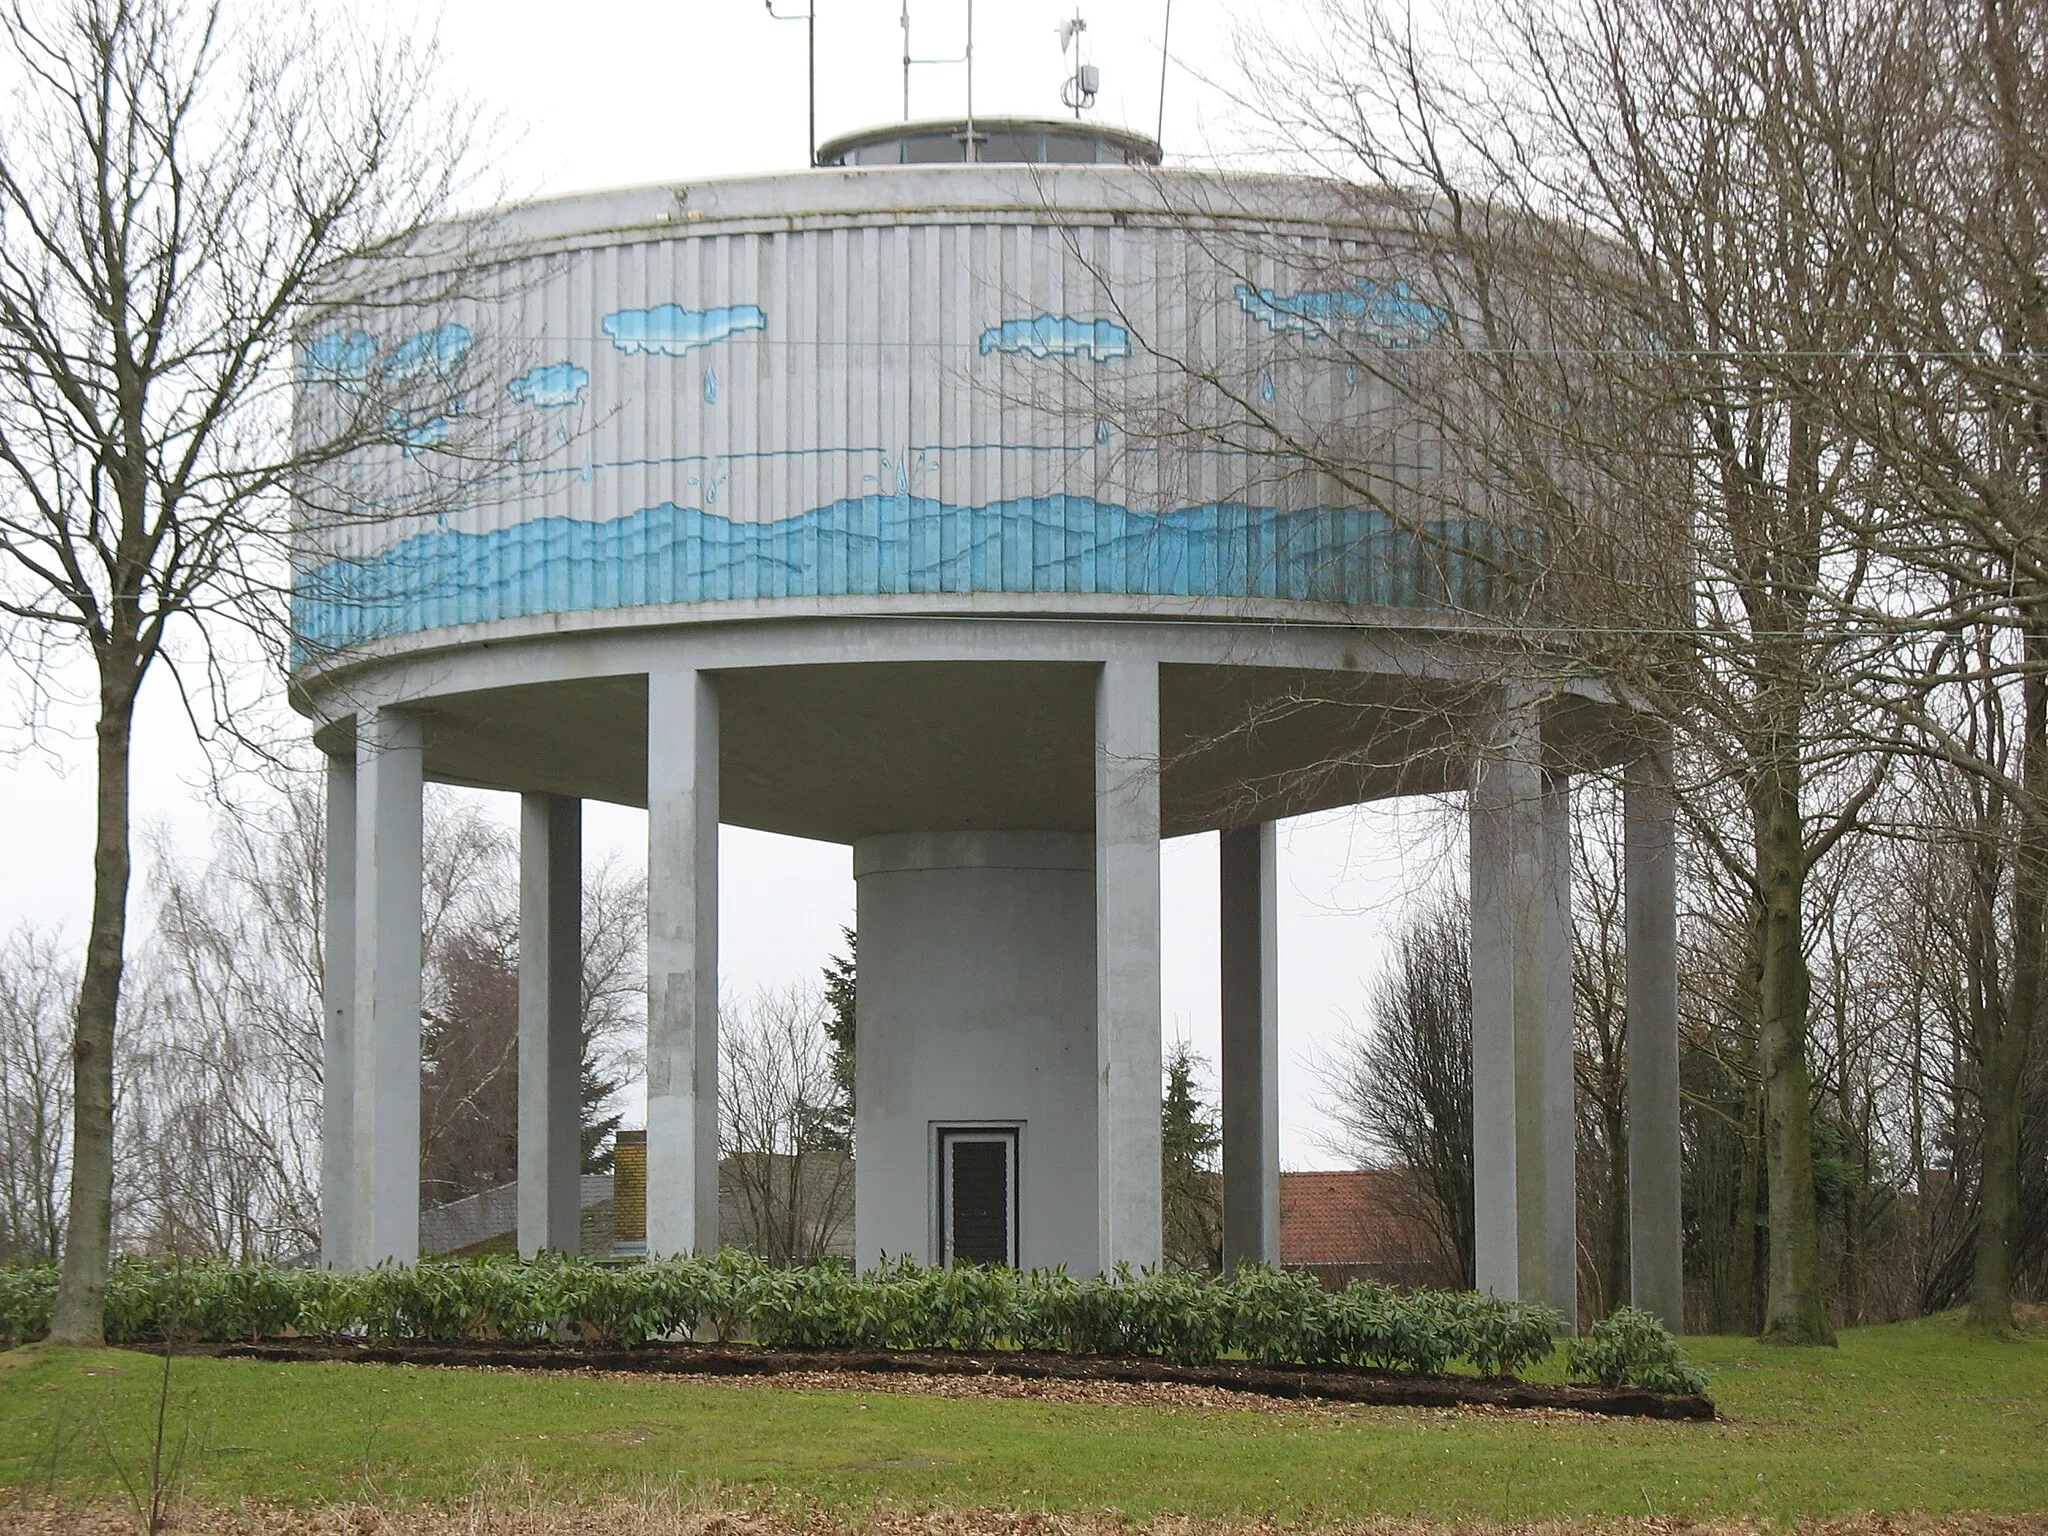 Photo showing: The water tower of the town "Brønderslev". The town is located in North Jutland, Denmark.